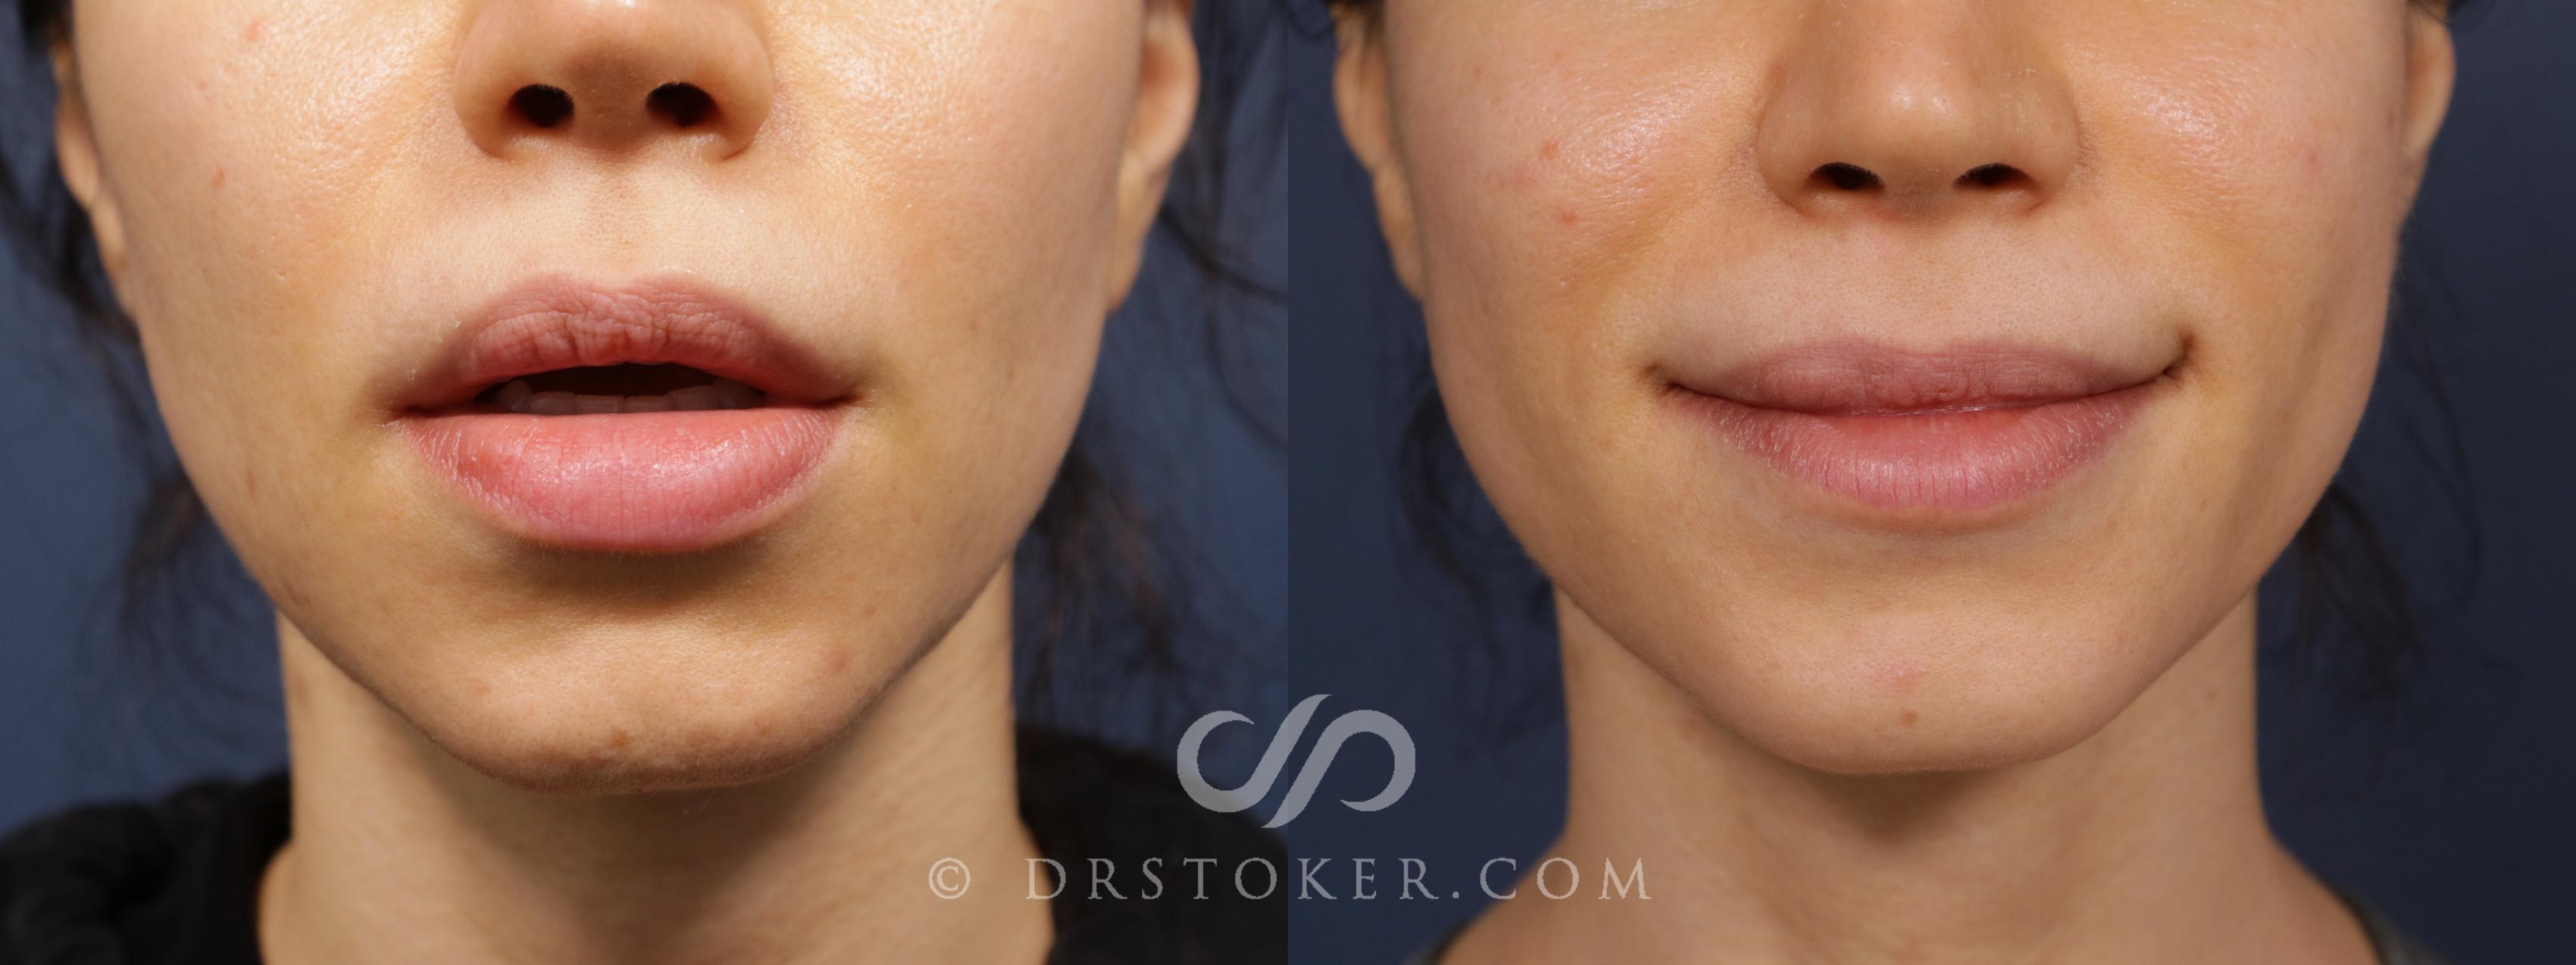 Before & After Silicone Lip Removal Case 2069 Front View in Marina del Rey, CA